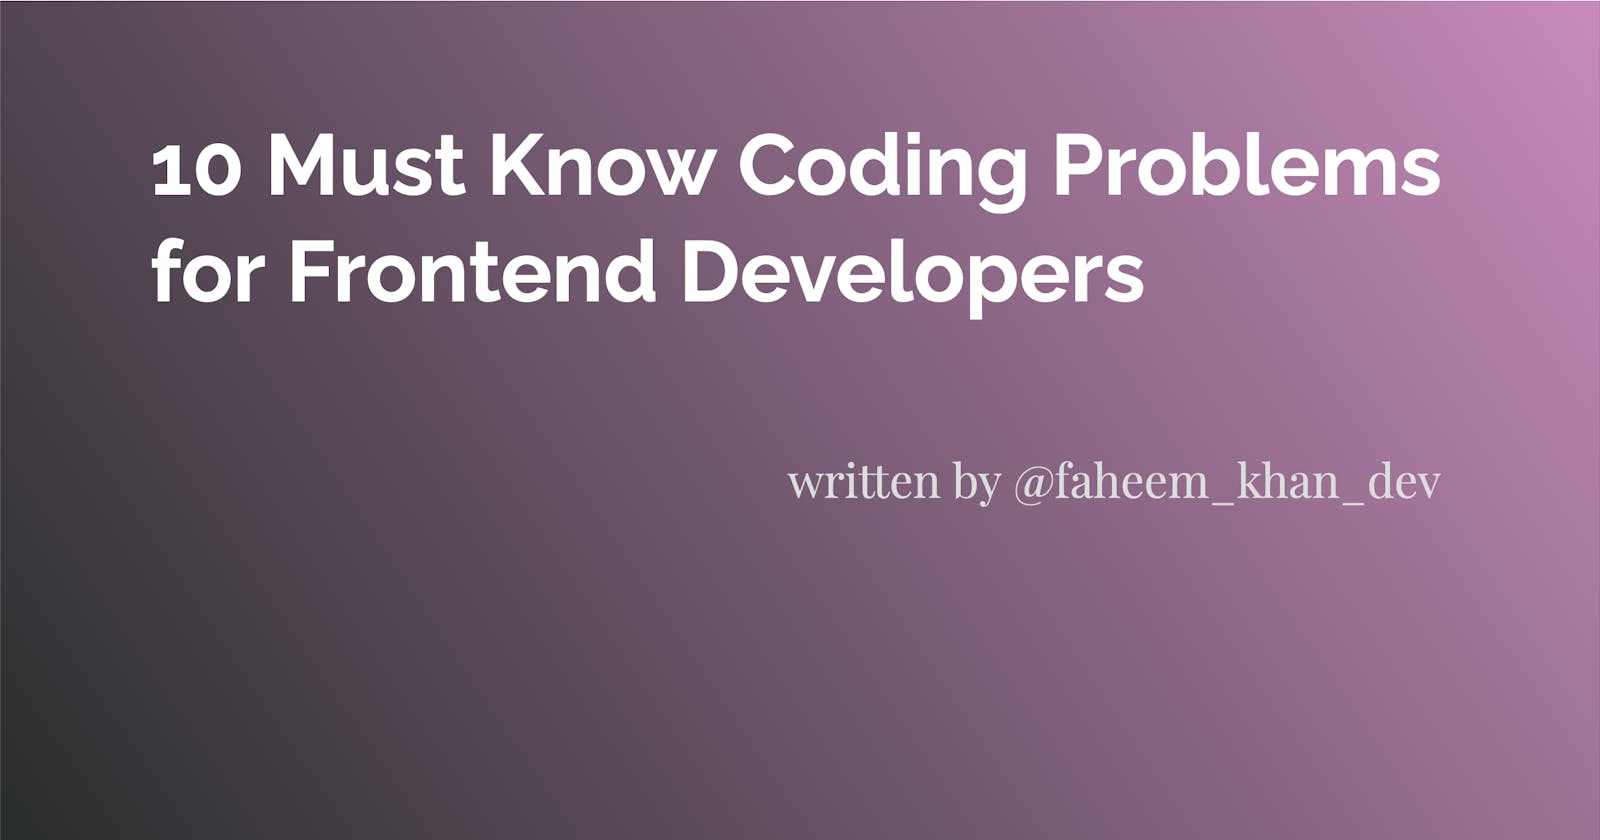 10 Must Know Coding Problems for Frontend Developers